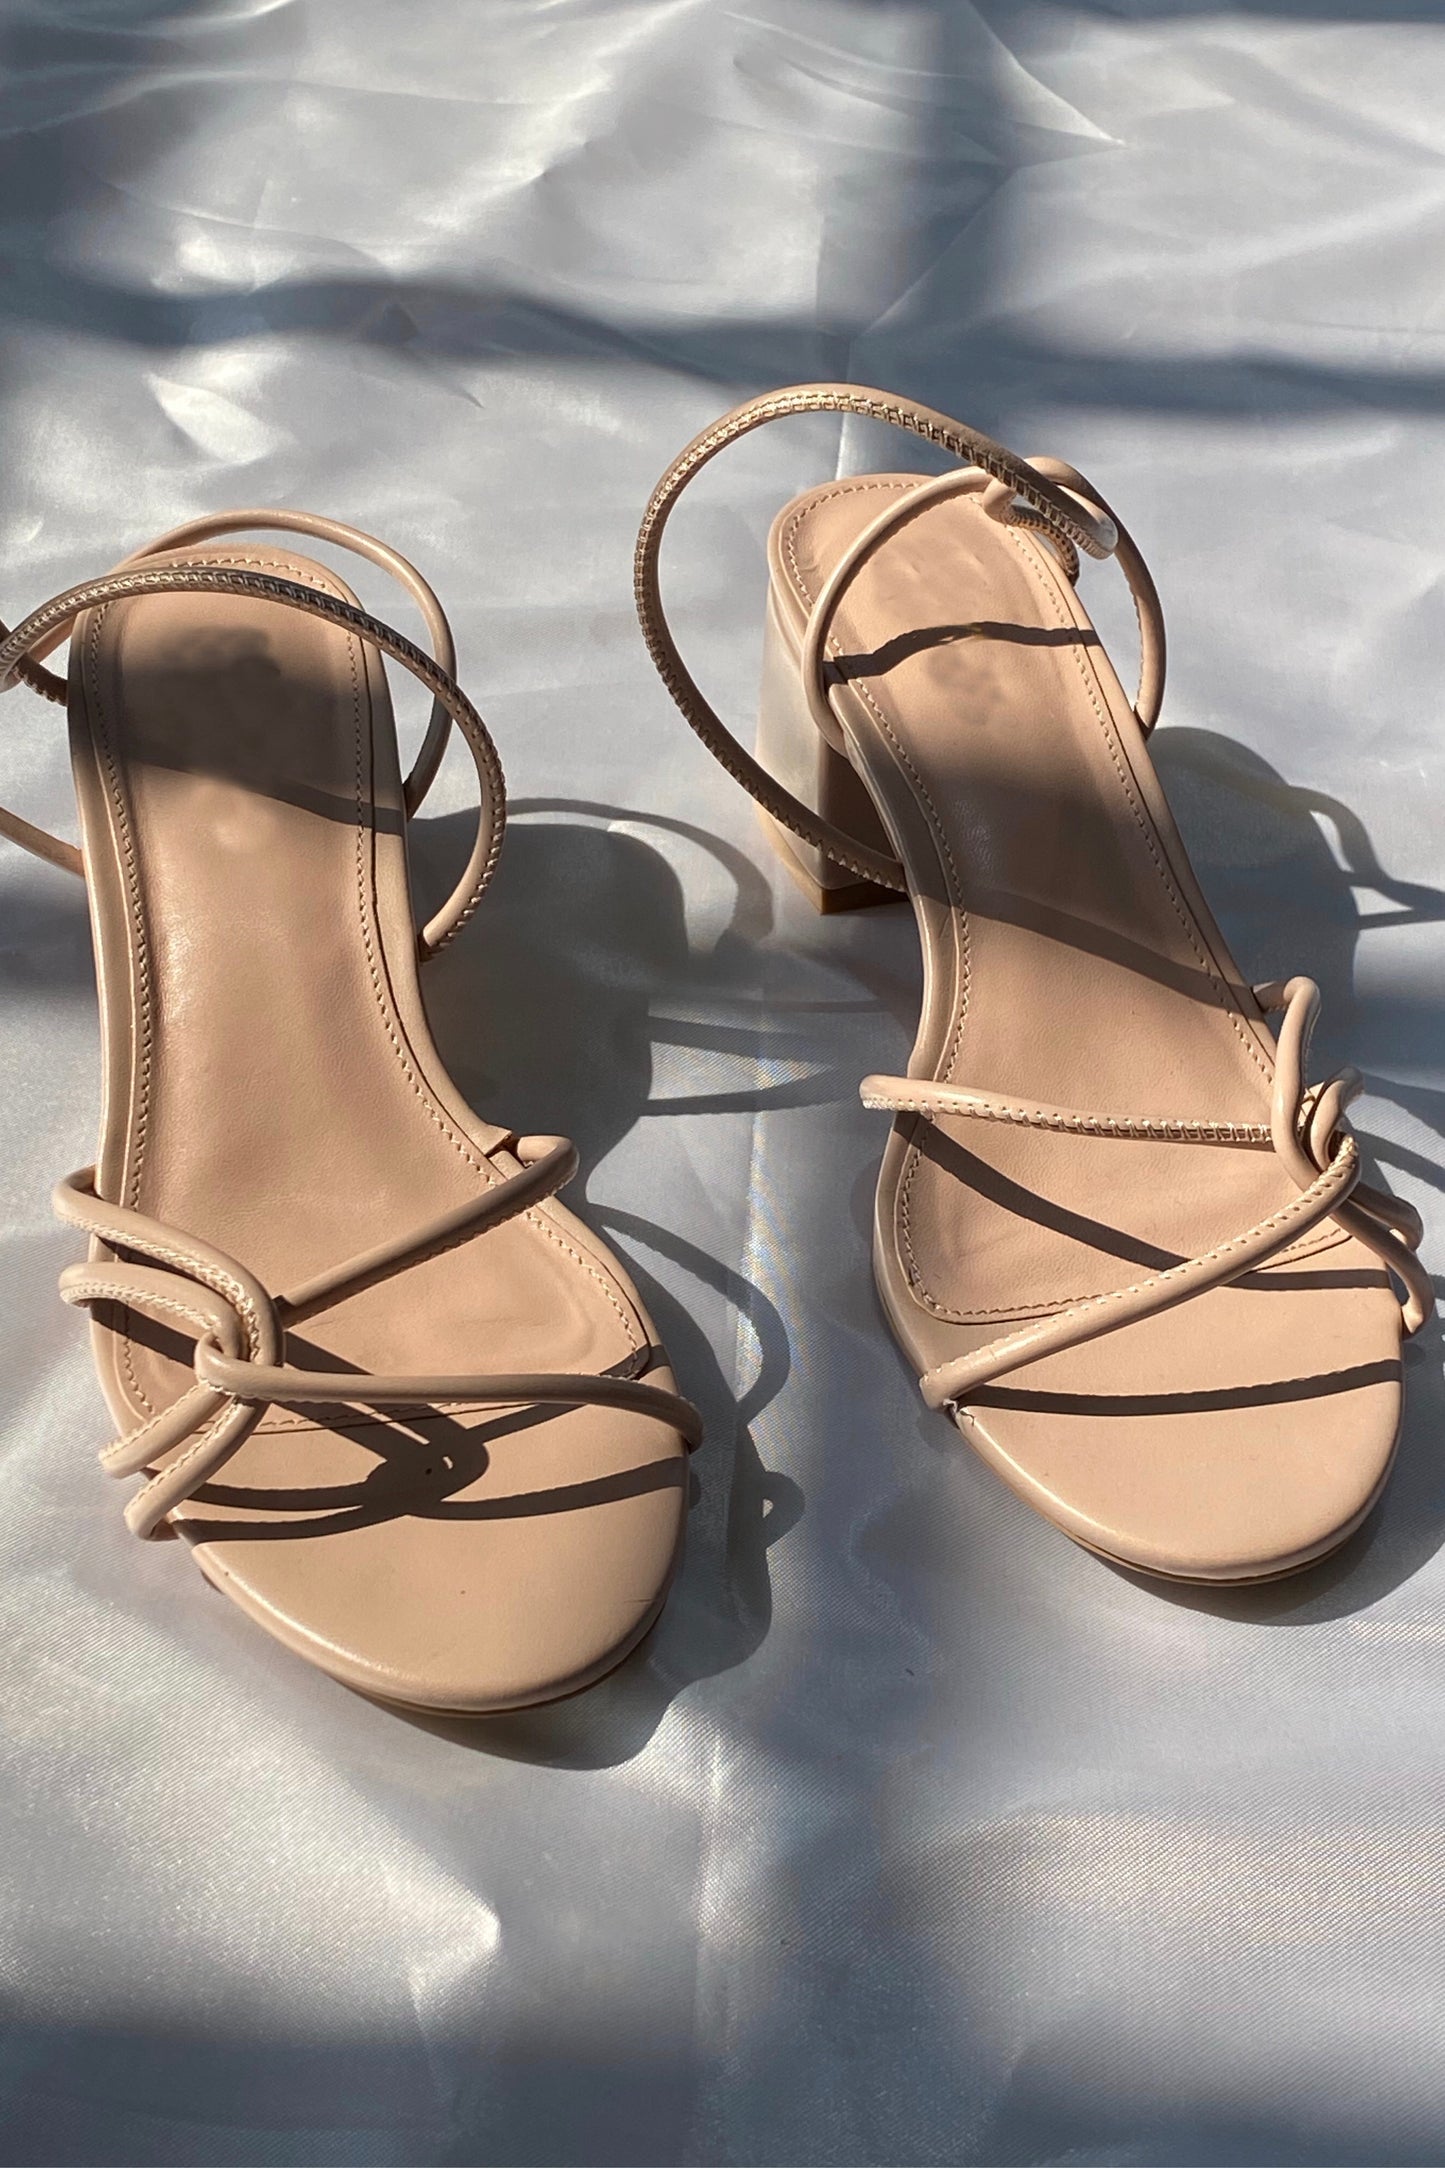 SANDALS WITH STRAPS WITH HEEL